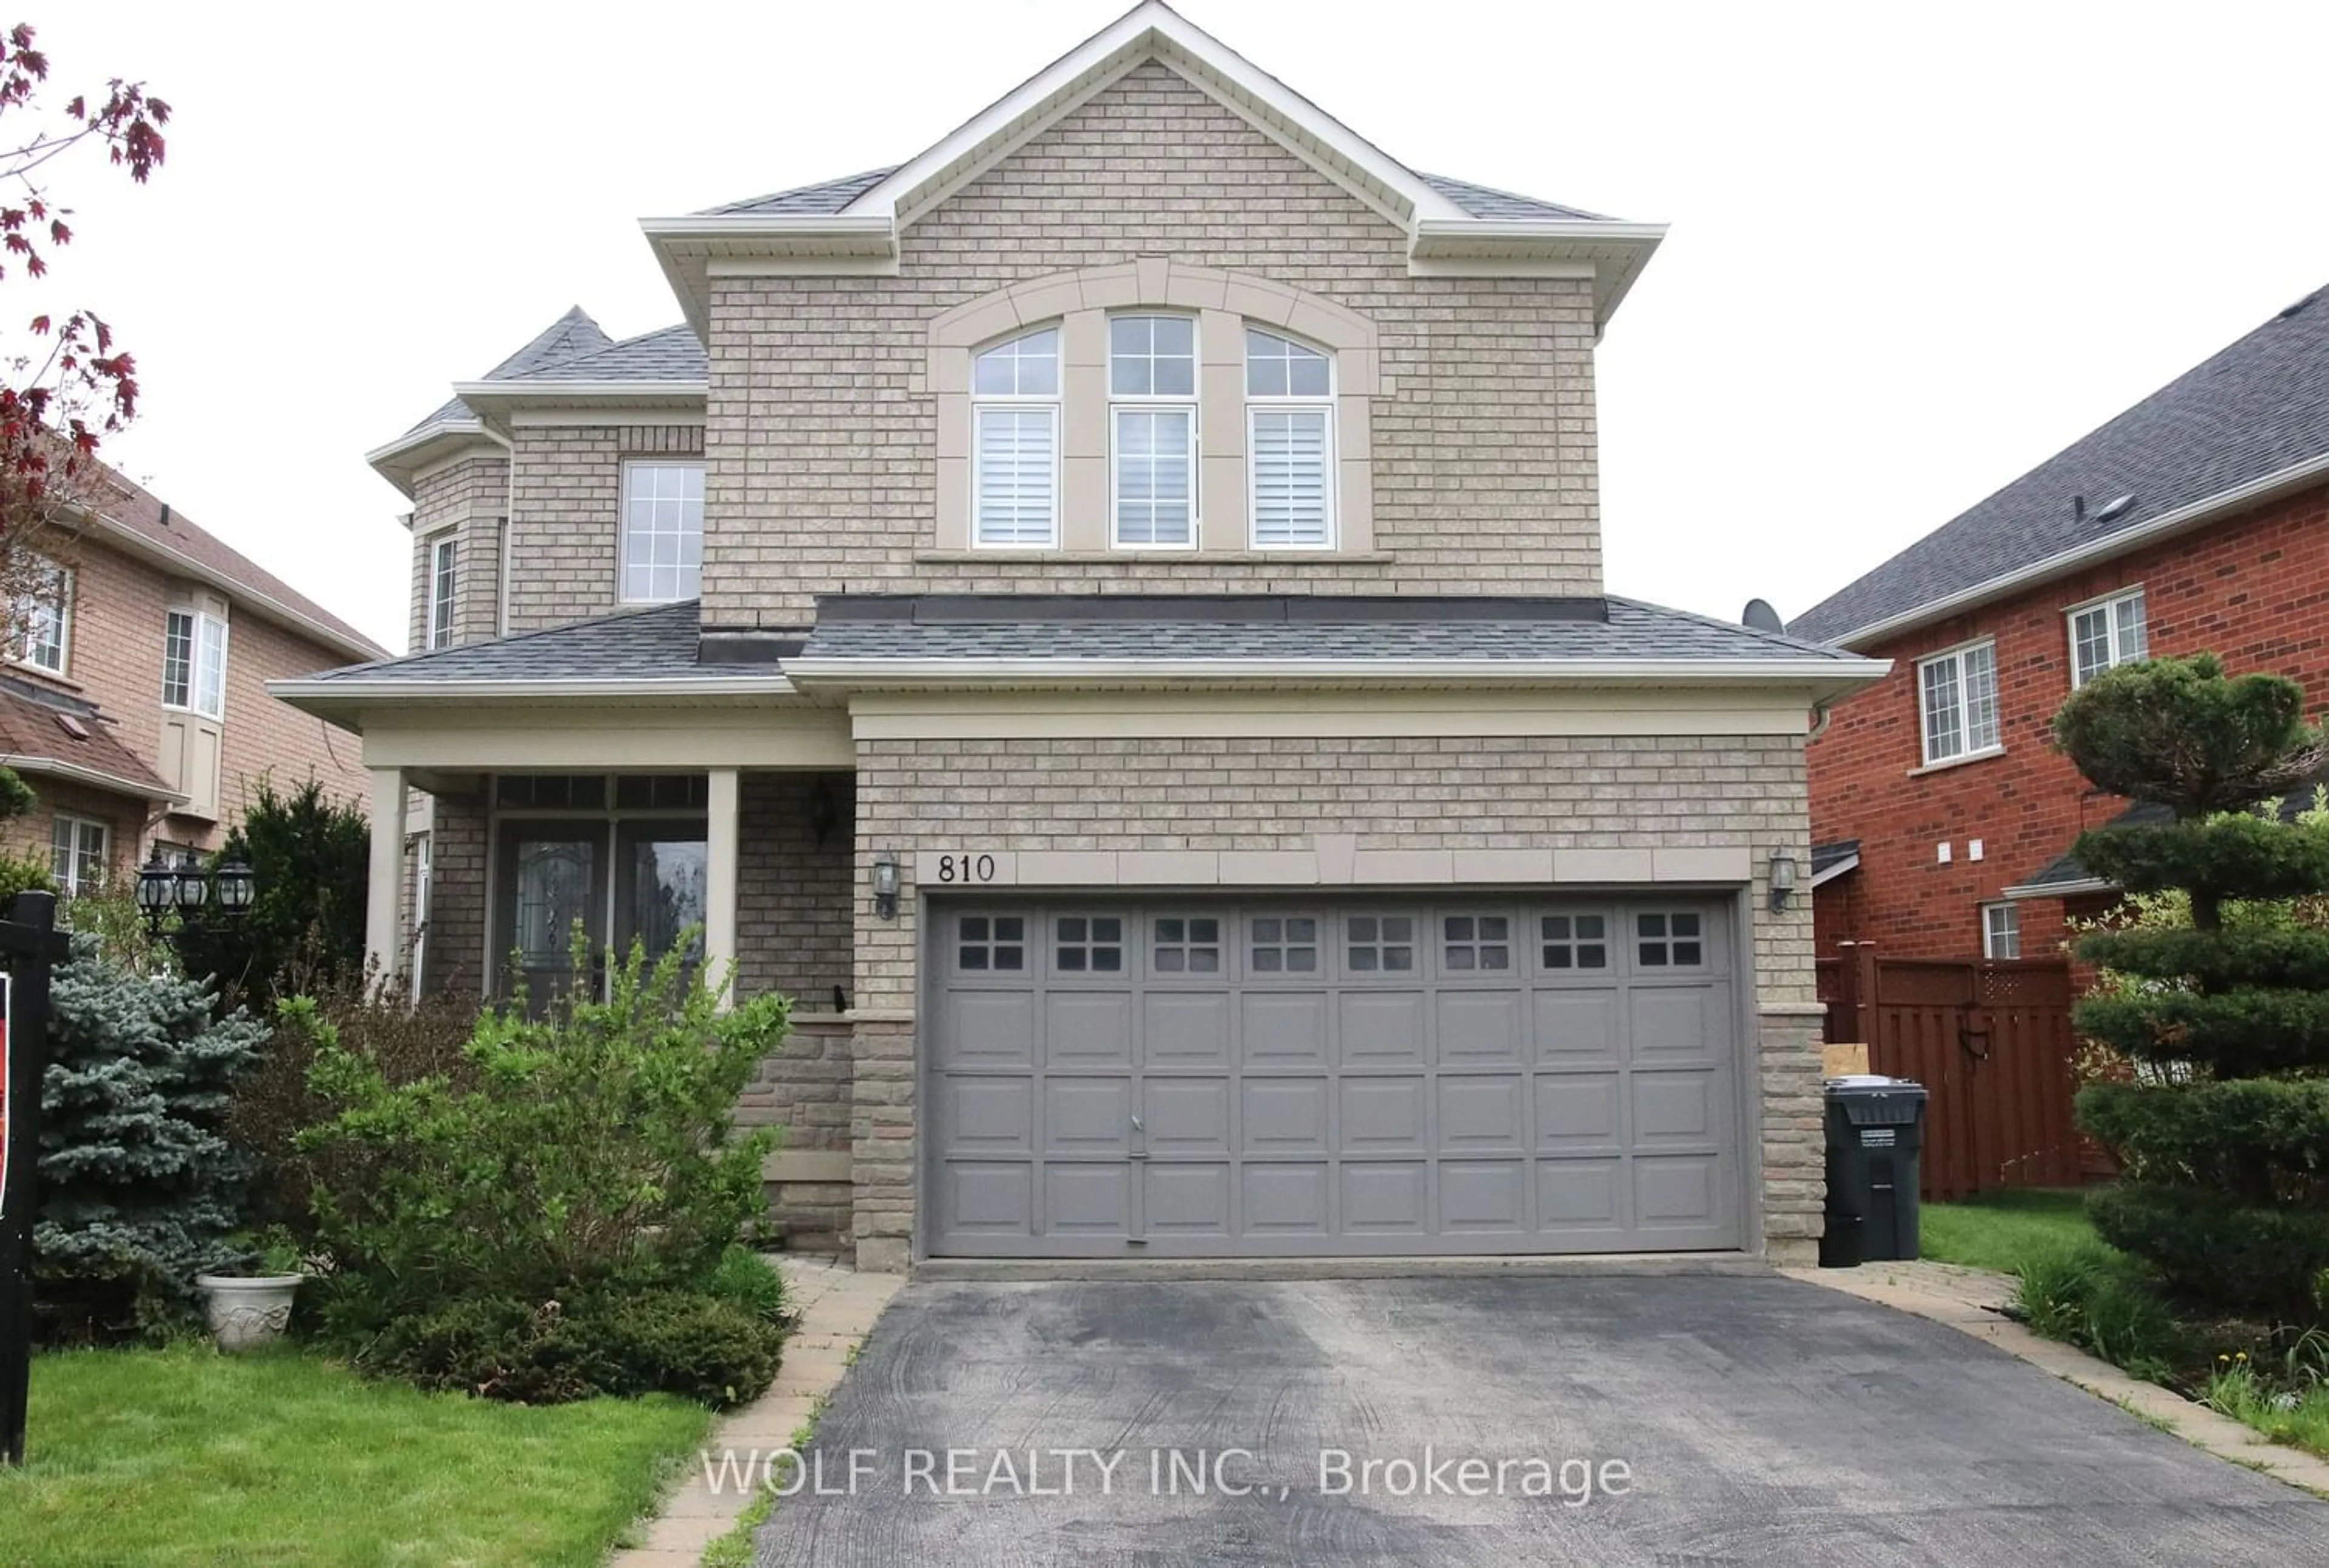 Home with brick exterior material for 810 Craig Carrier Crt, Mississauga Ontario L5W 1A6